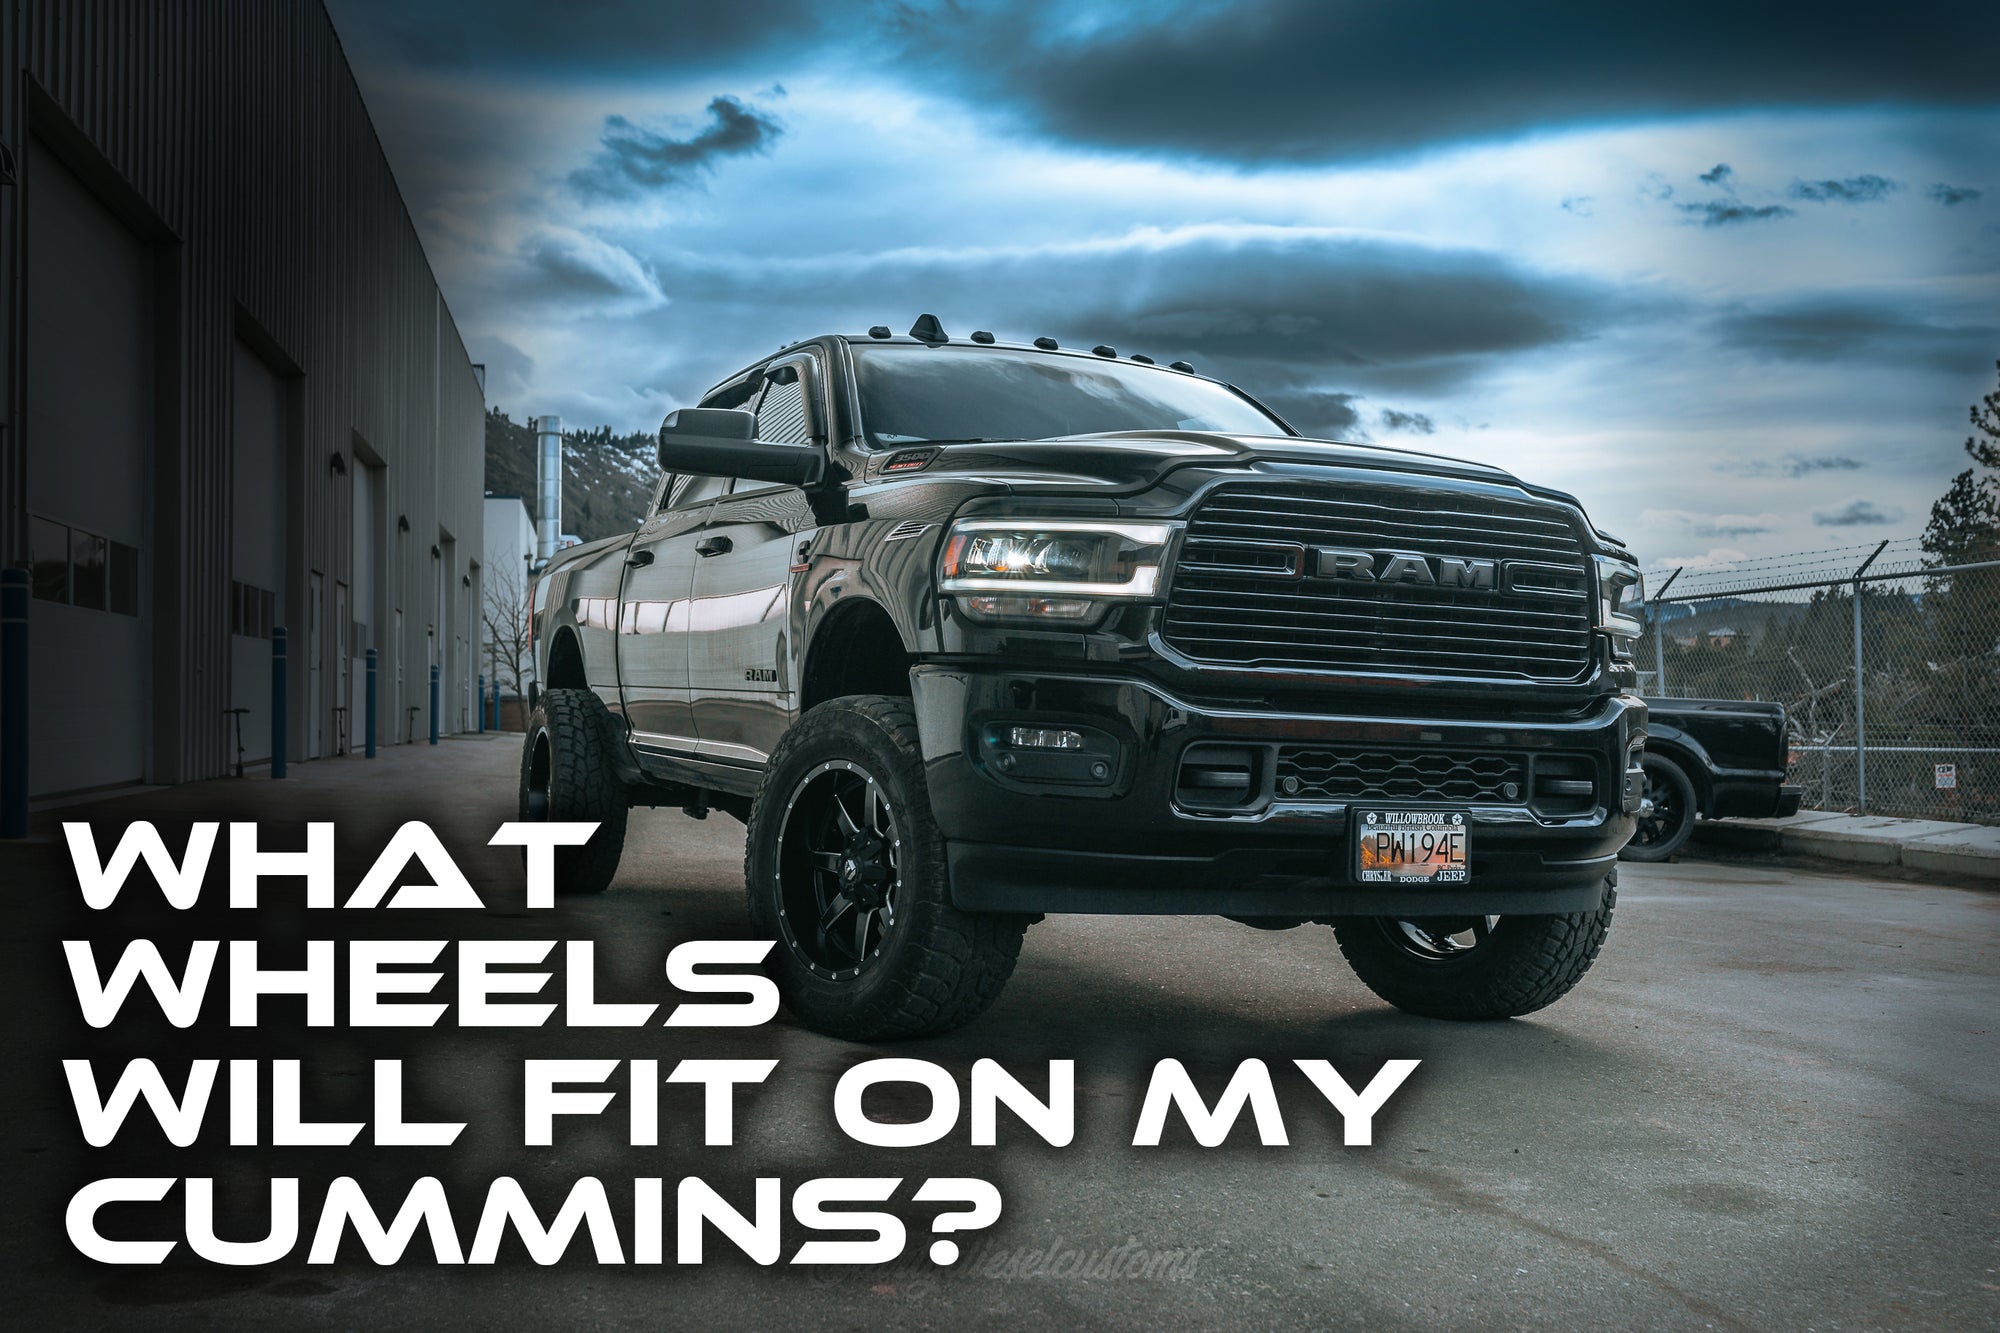 What size wheels will fit on my Cummins?